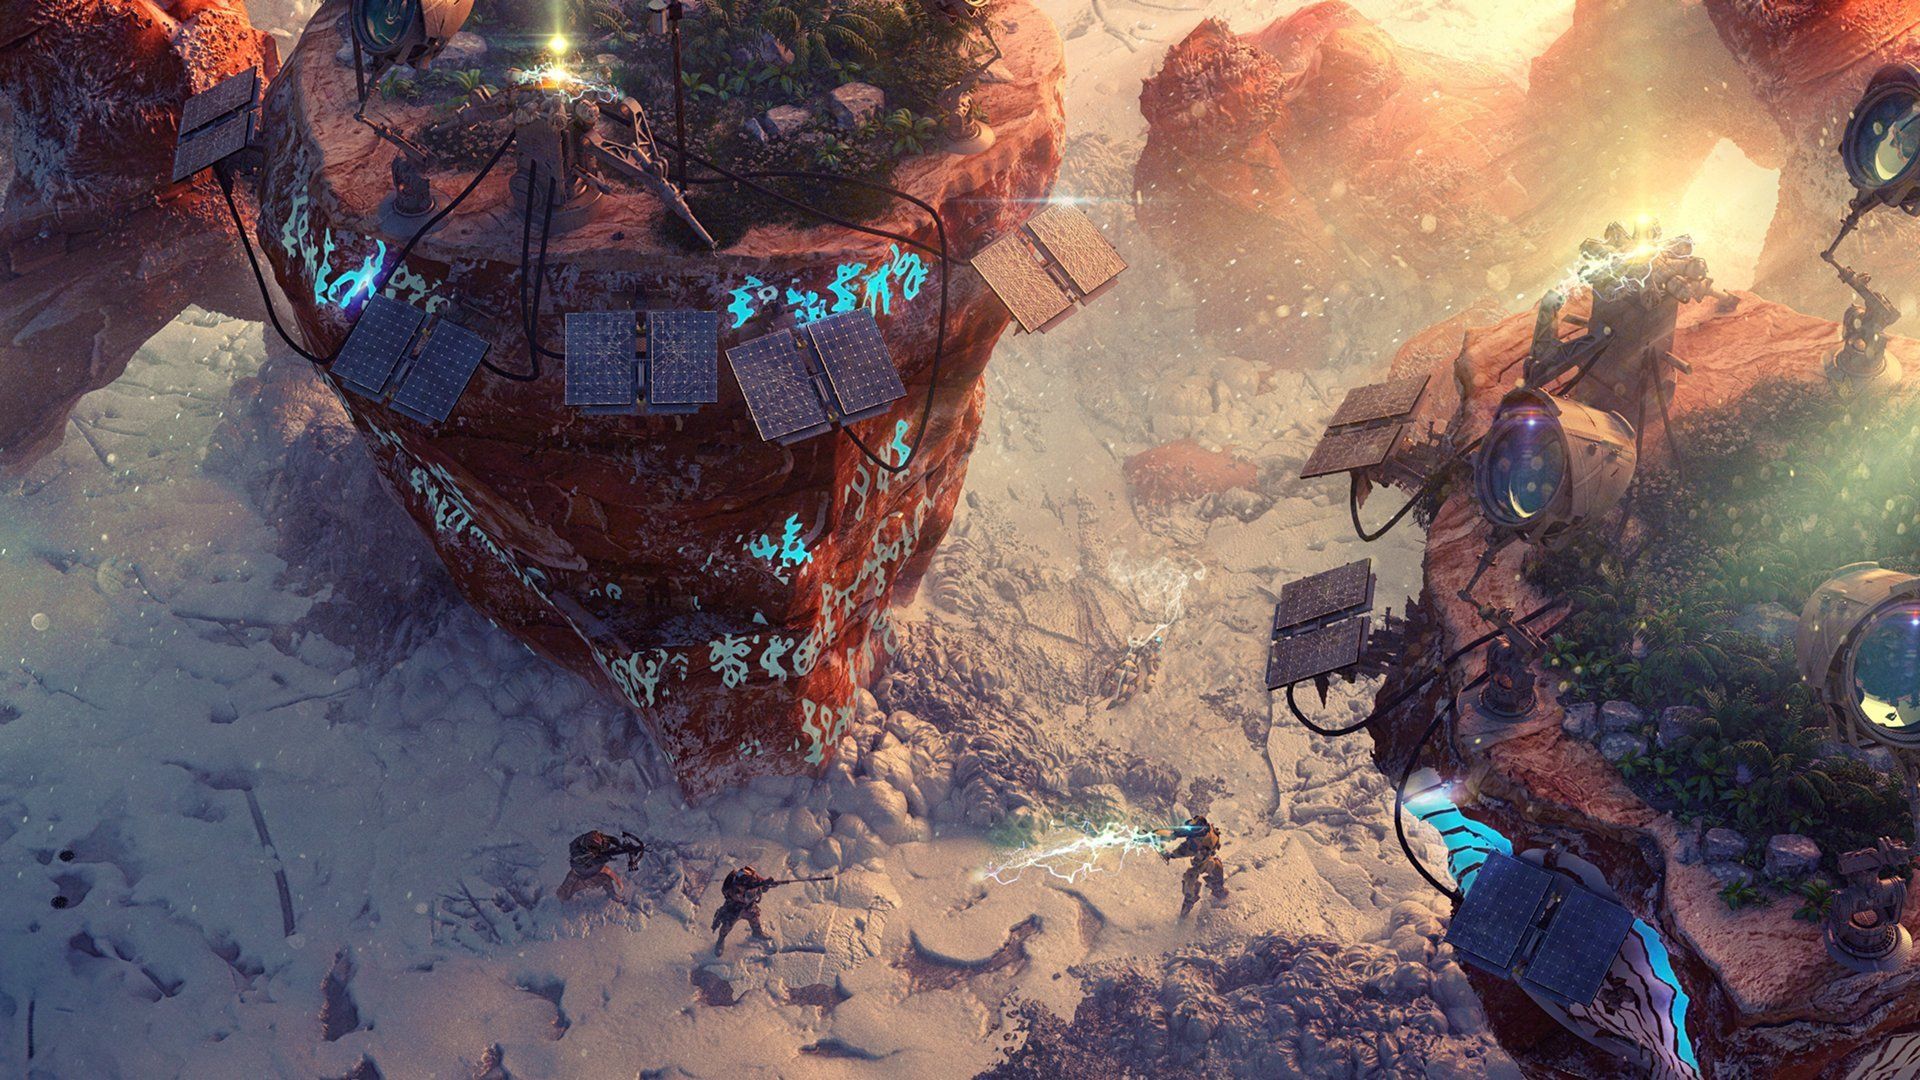 Wasteland 3: Release Date, Gameplay, Trailer, and News. Den of Geek